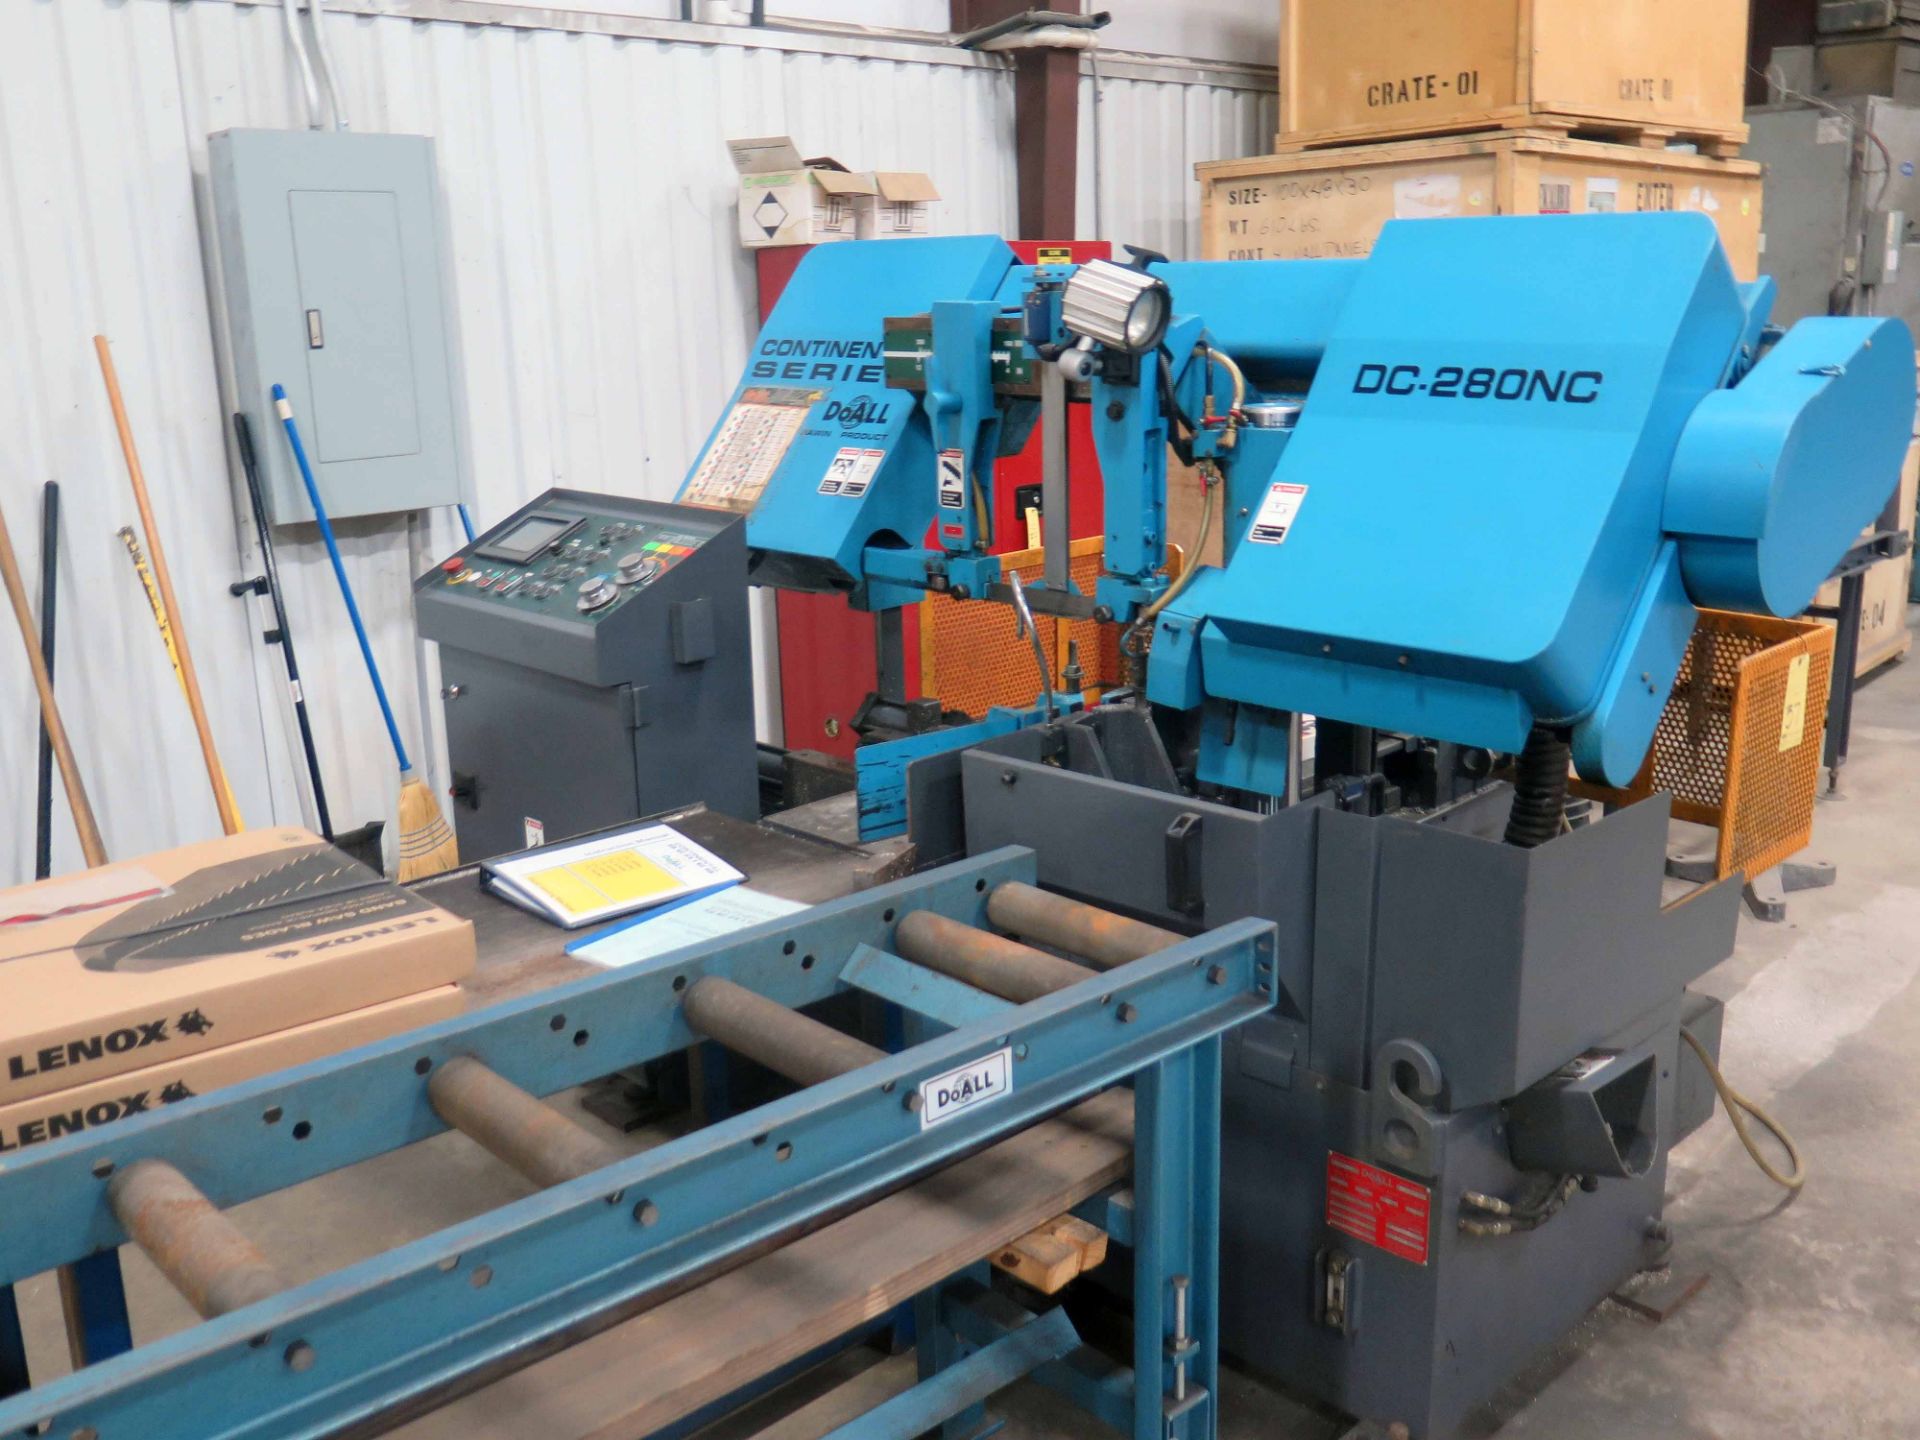 AUTOMATIC HORIZONTAL BANDSAW, DOALL MDL. DC-280NC CONTINENTAL SERIES, new 2013, 11" round cap., 1-